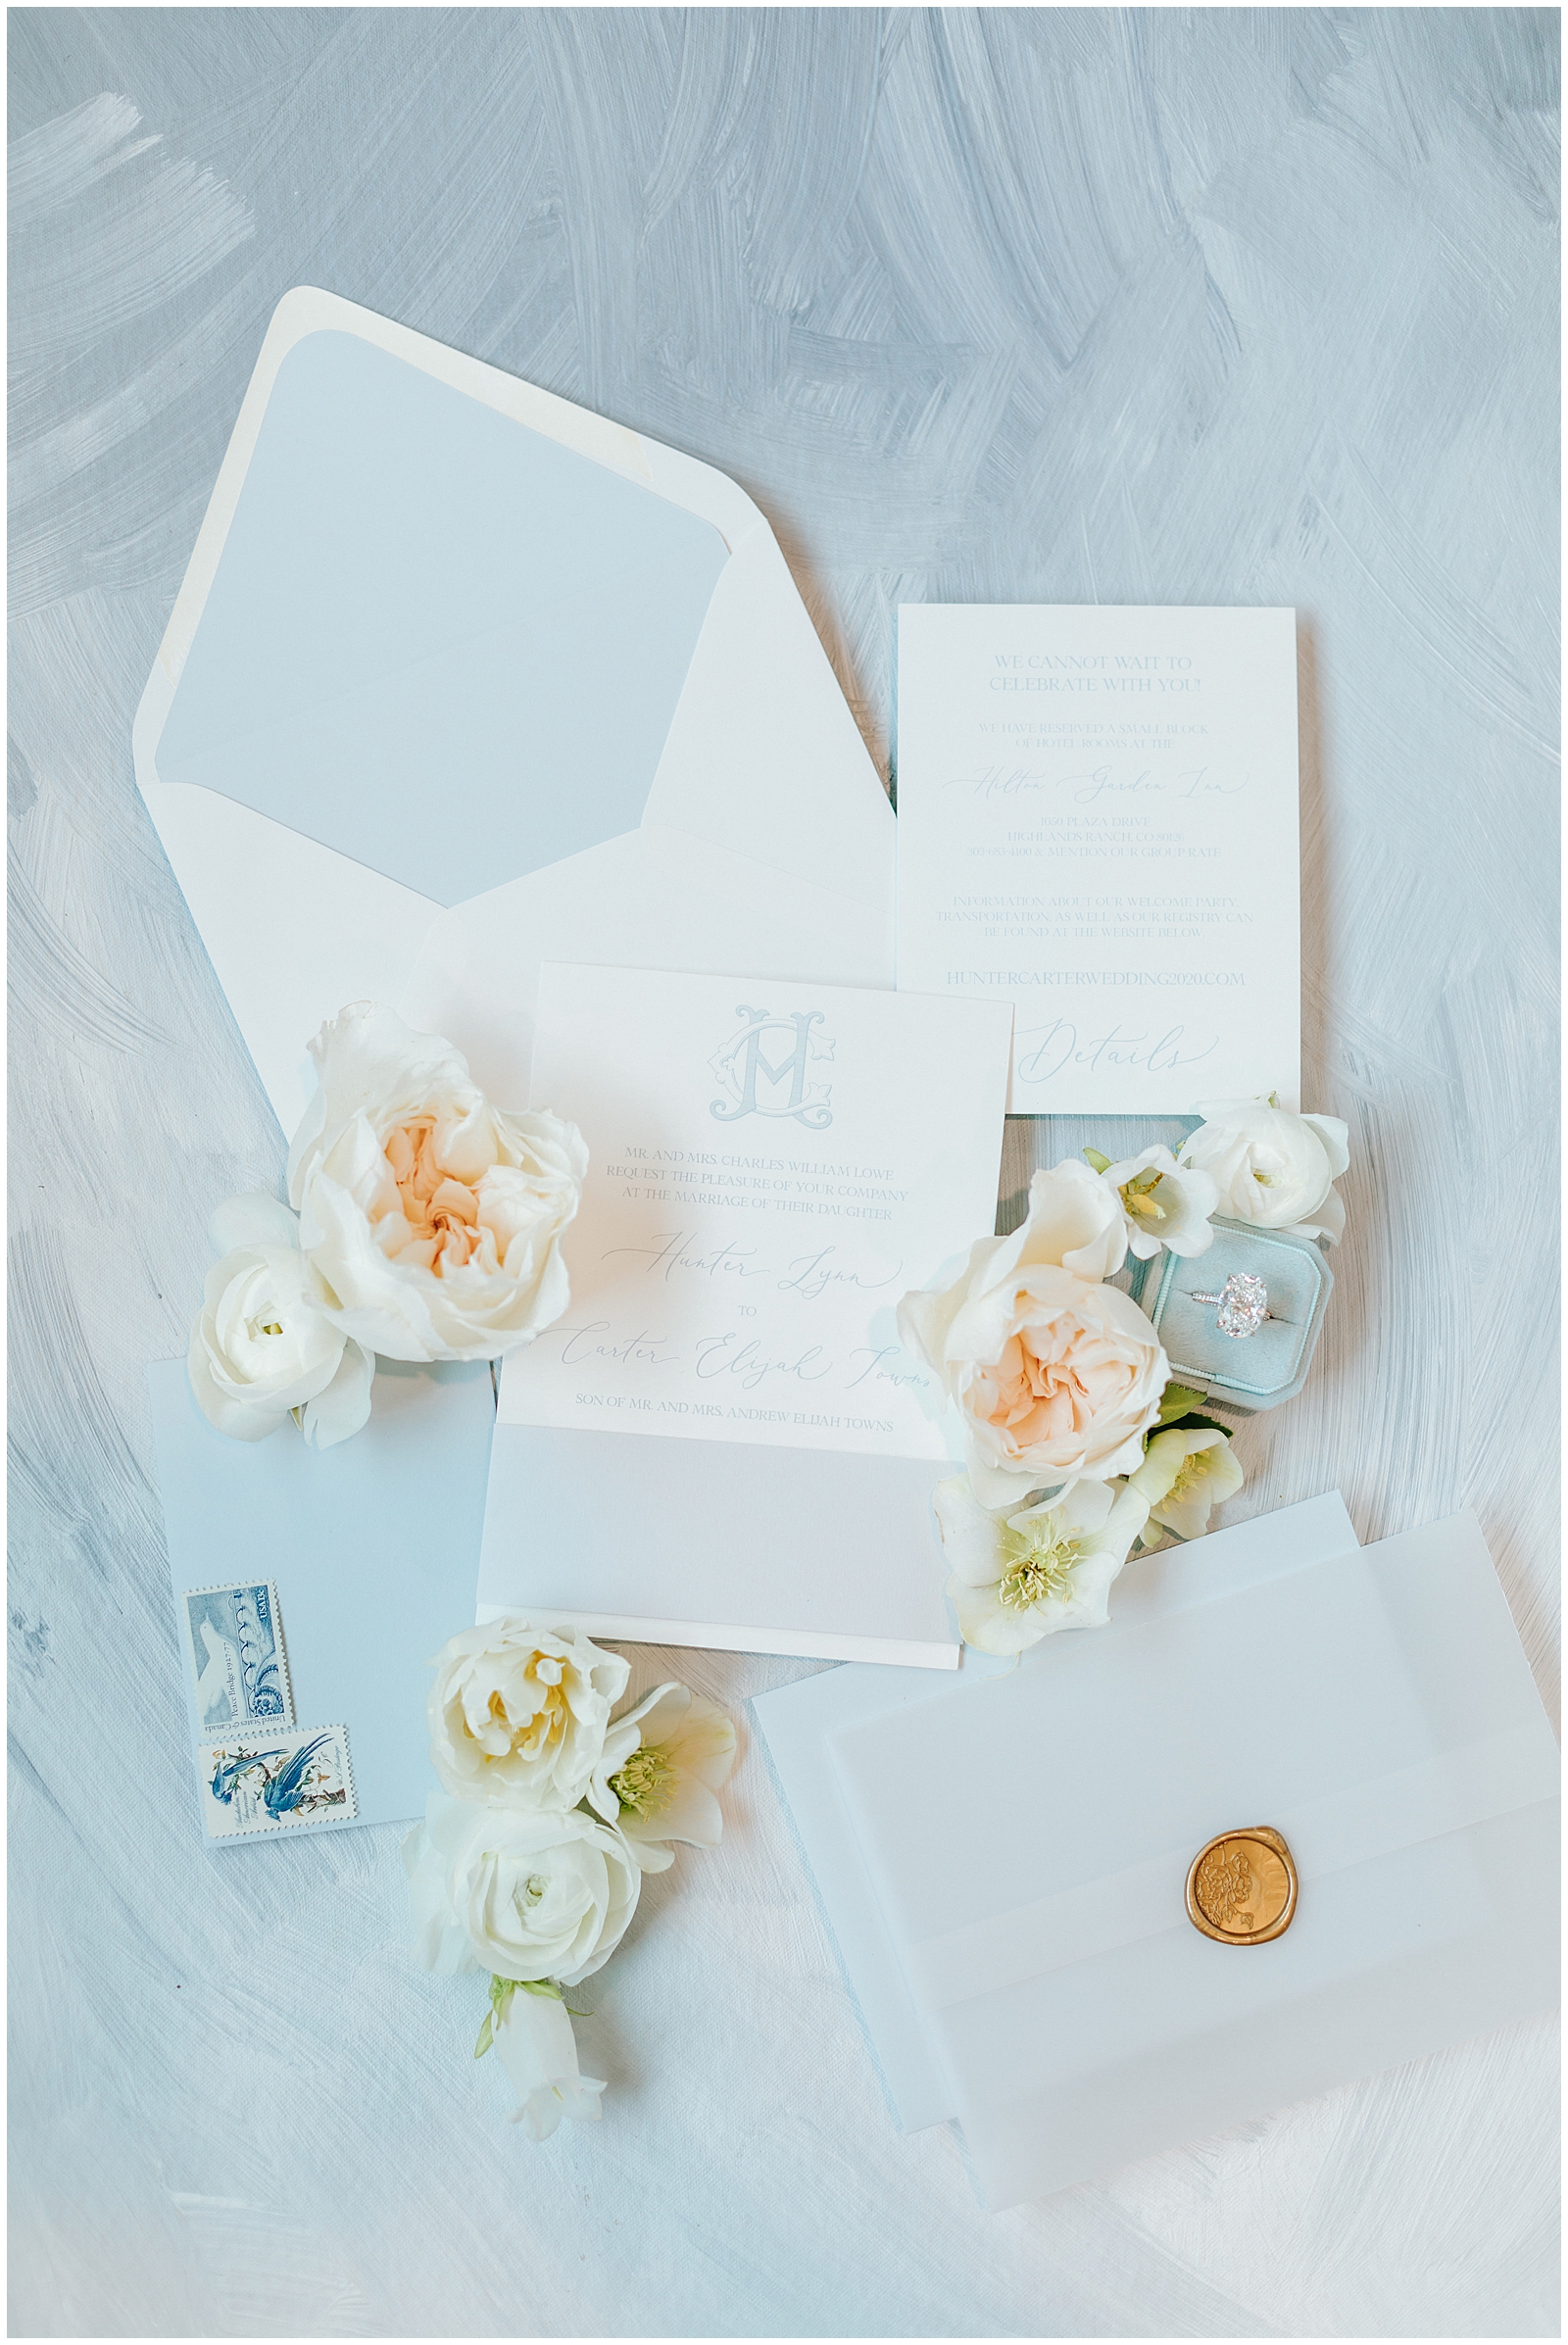 Dusty Blue Invitation Suite Flatlay with Florals, Wax Seal, and vintage stamps